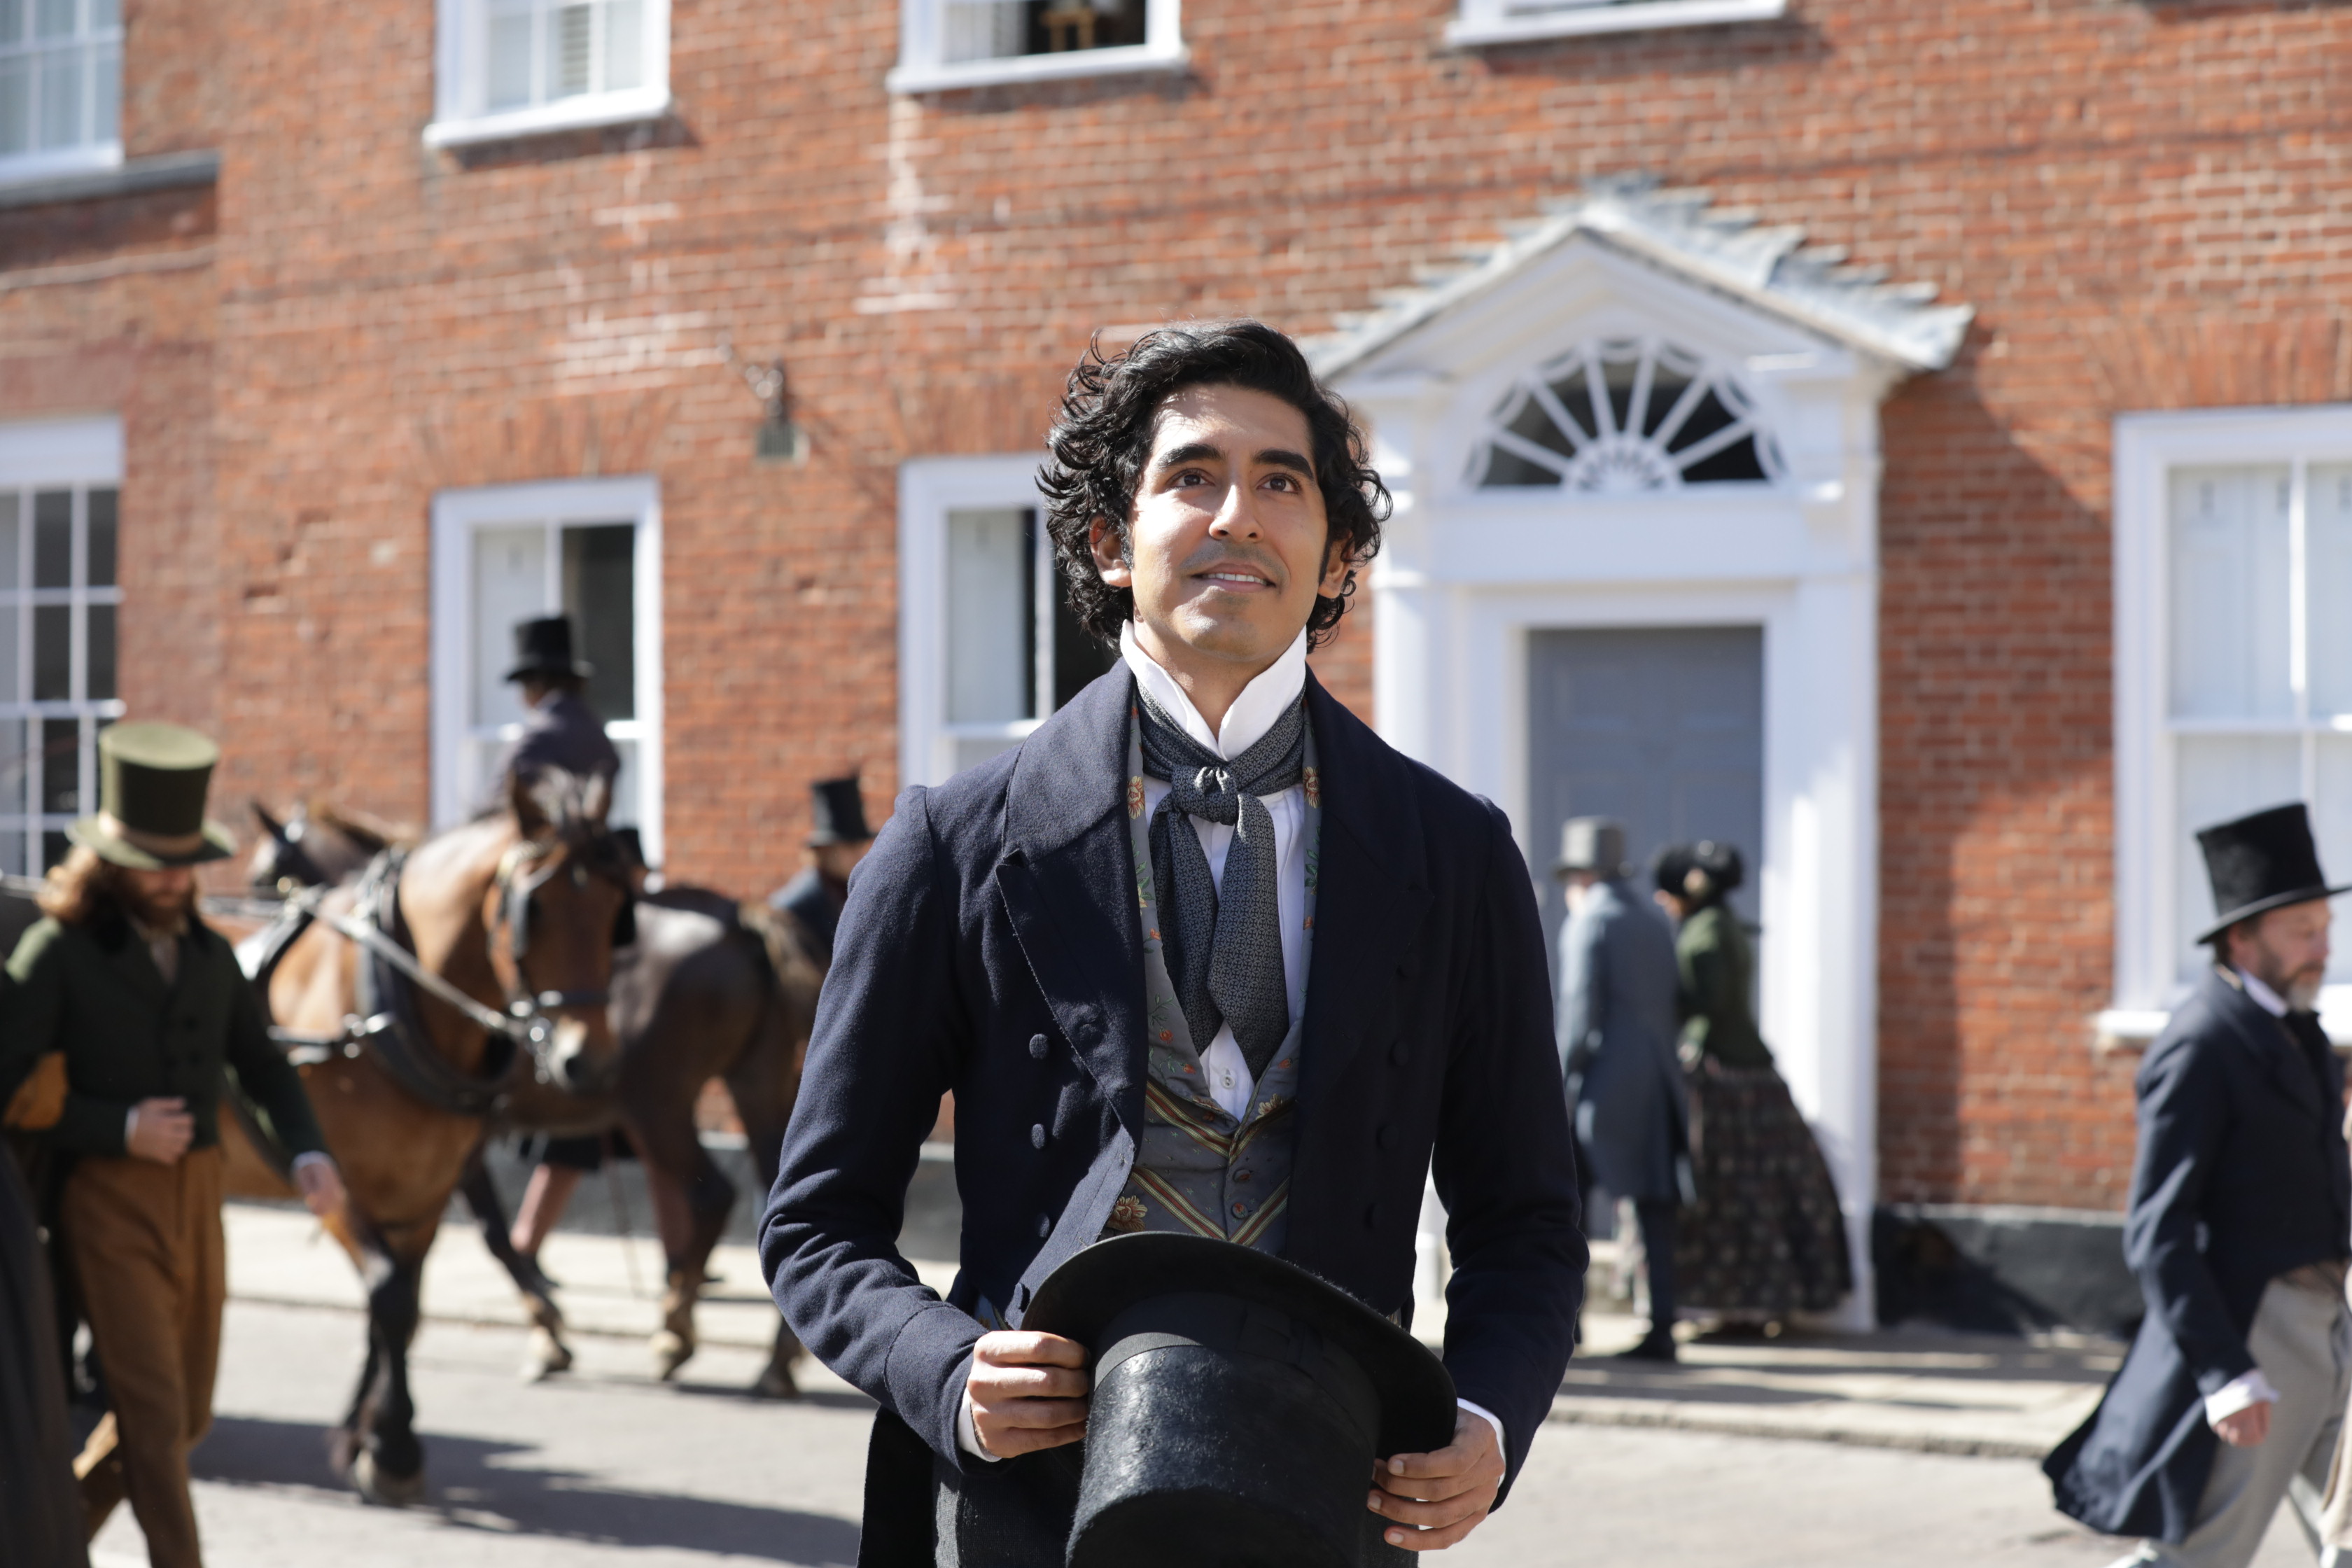 Dev Patel in 'The Personal History of David Copperfield' (Photo by Dean Rogers. © 2019 Twentieth Century Fox Film Corporation All Rights Reserved)